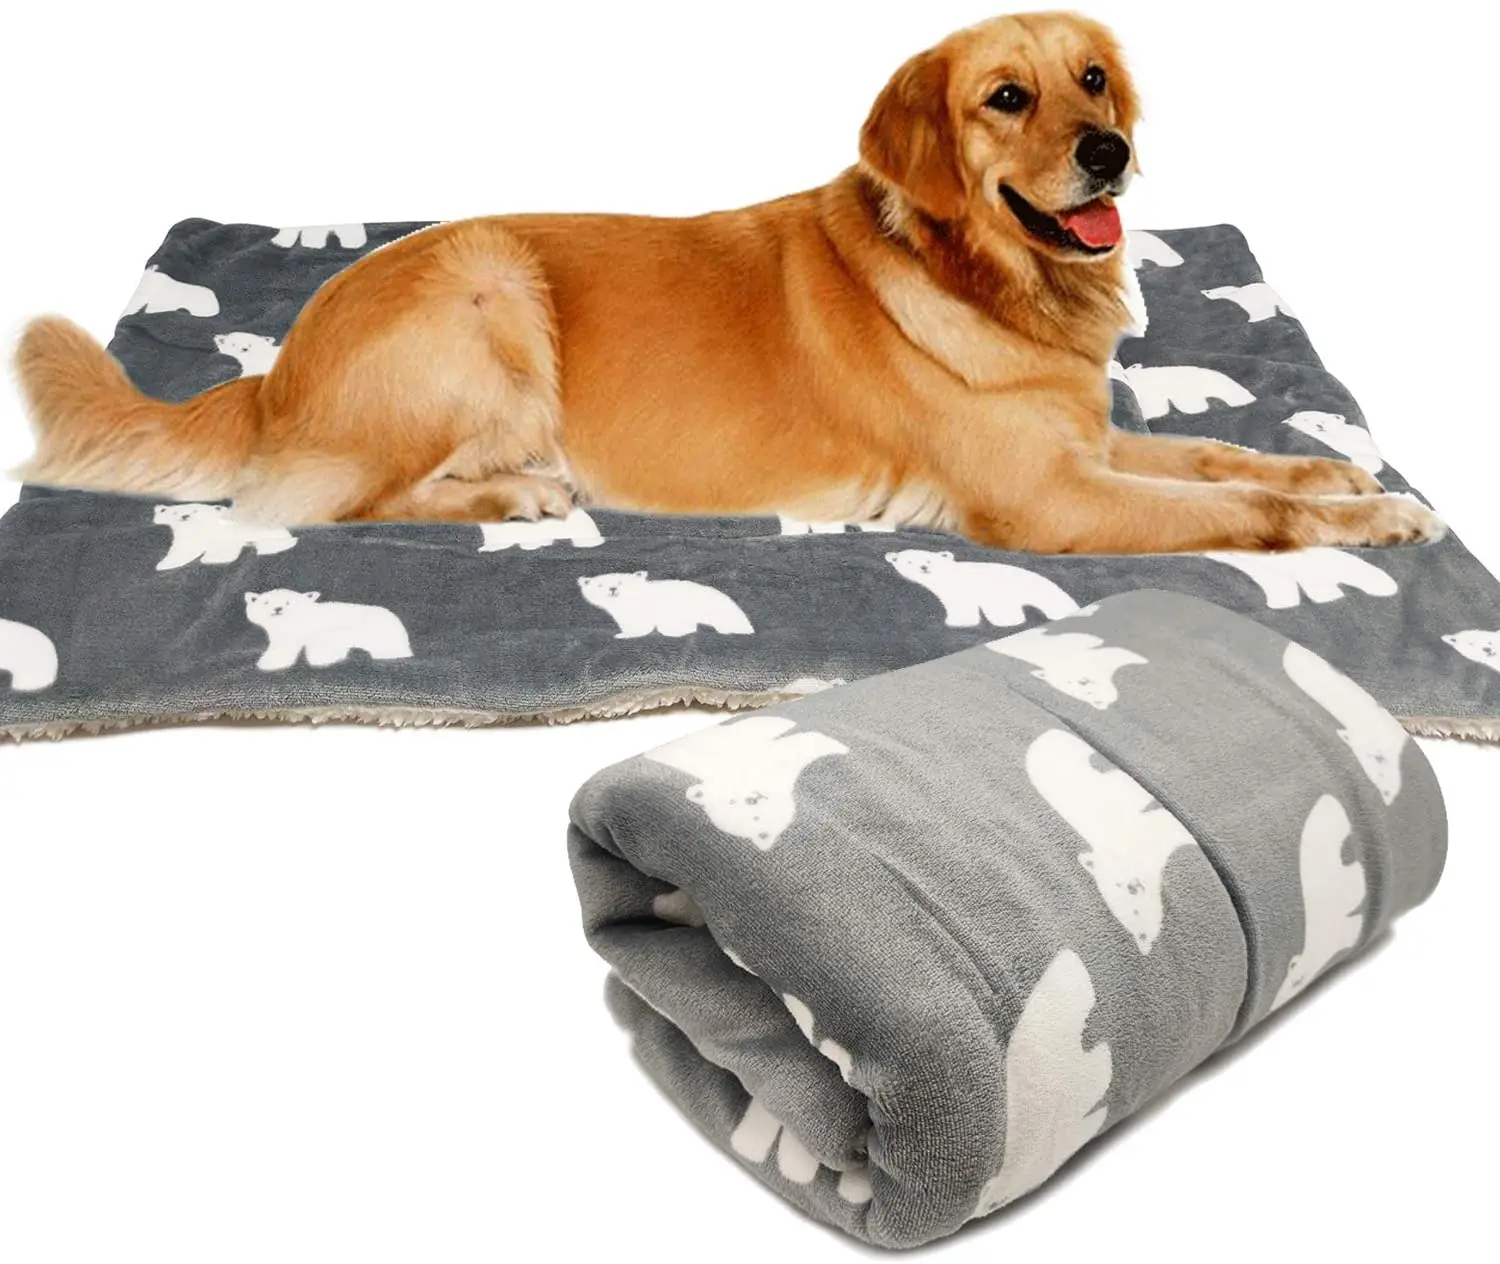 BPS BPS-14094PE Blanket for Dogs Cats Bed Pets Non-Slip Size S/M/L Portable Mattress Sofa Pillow S: 80 x 60 cm, Dogs